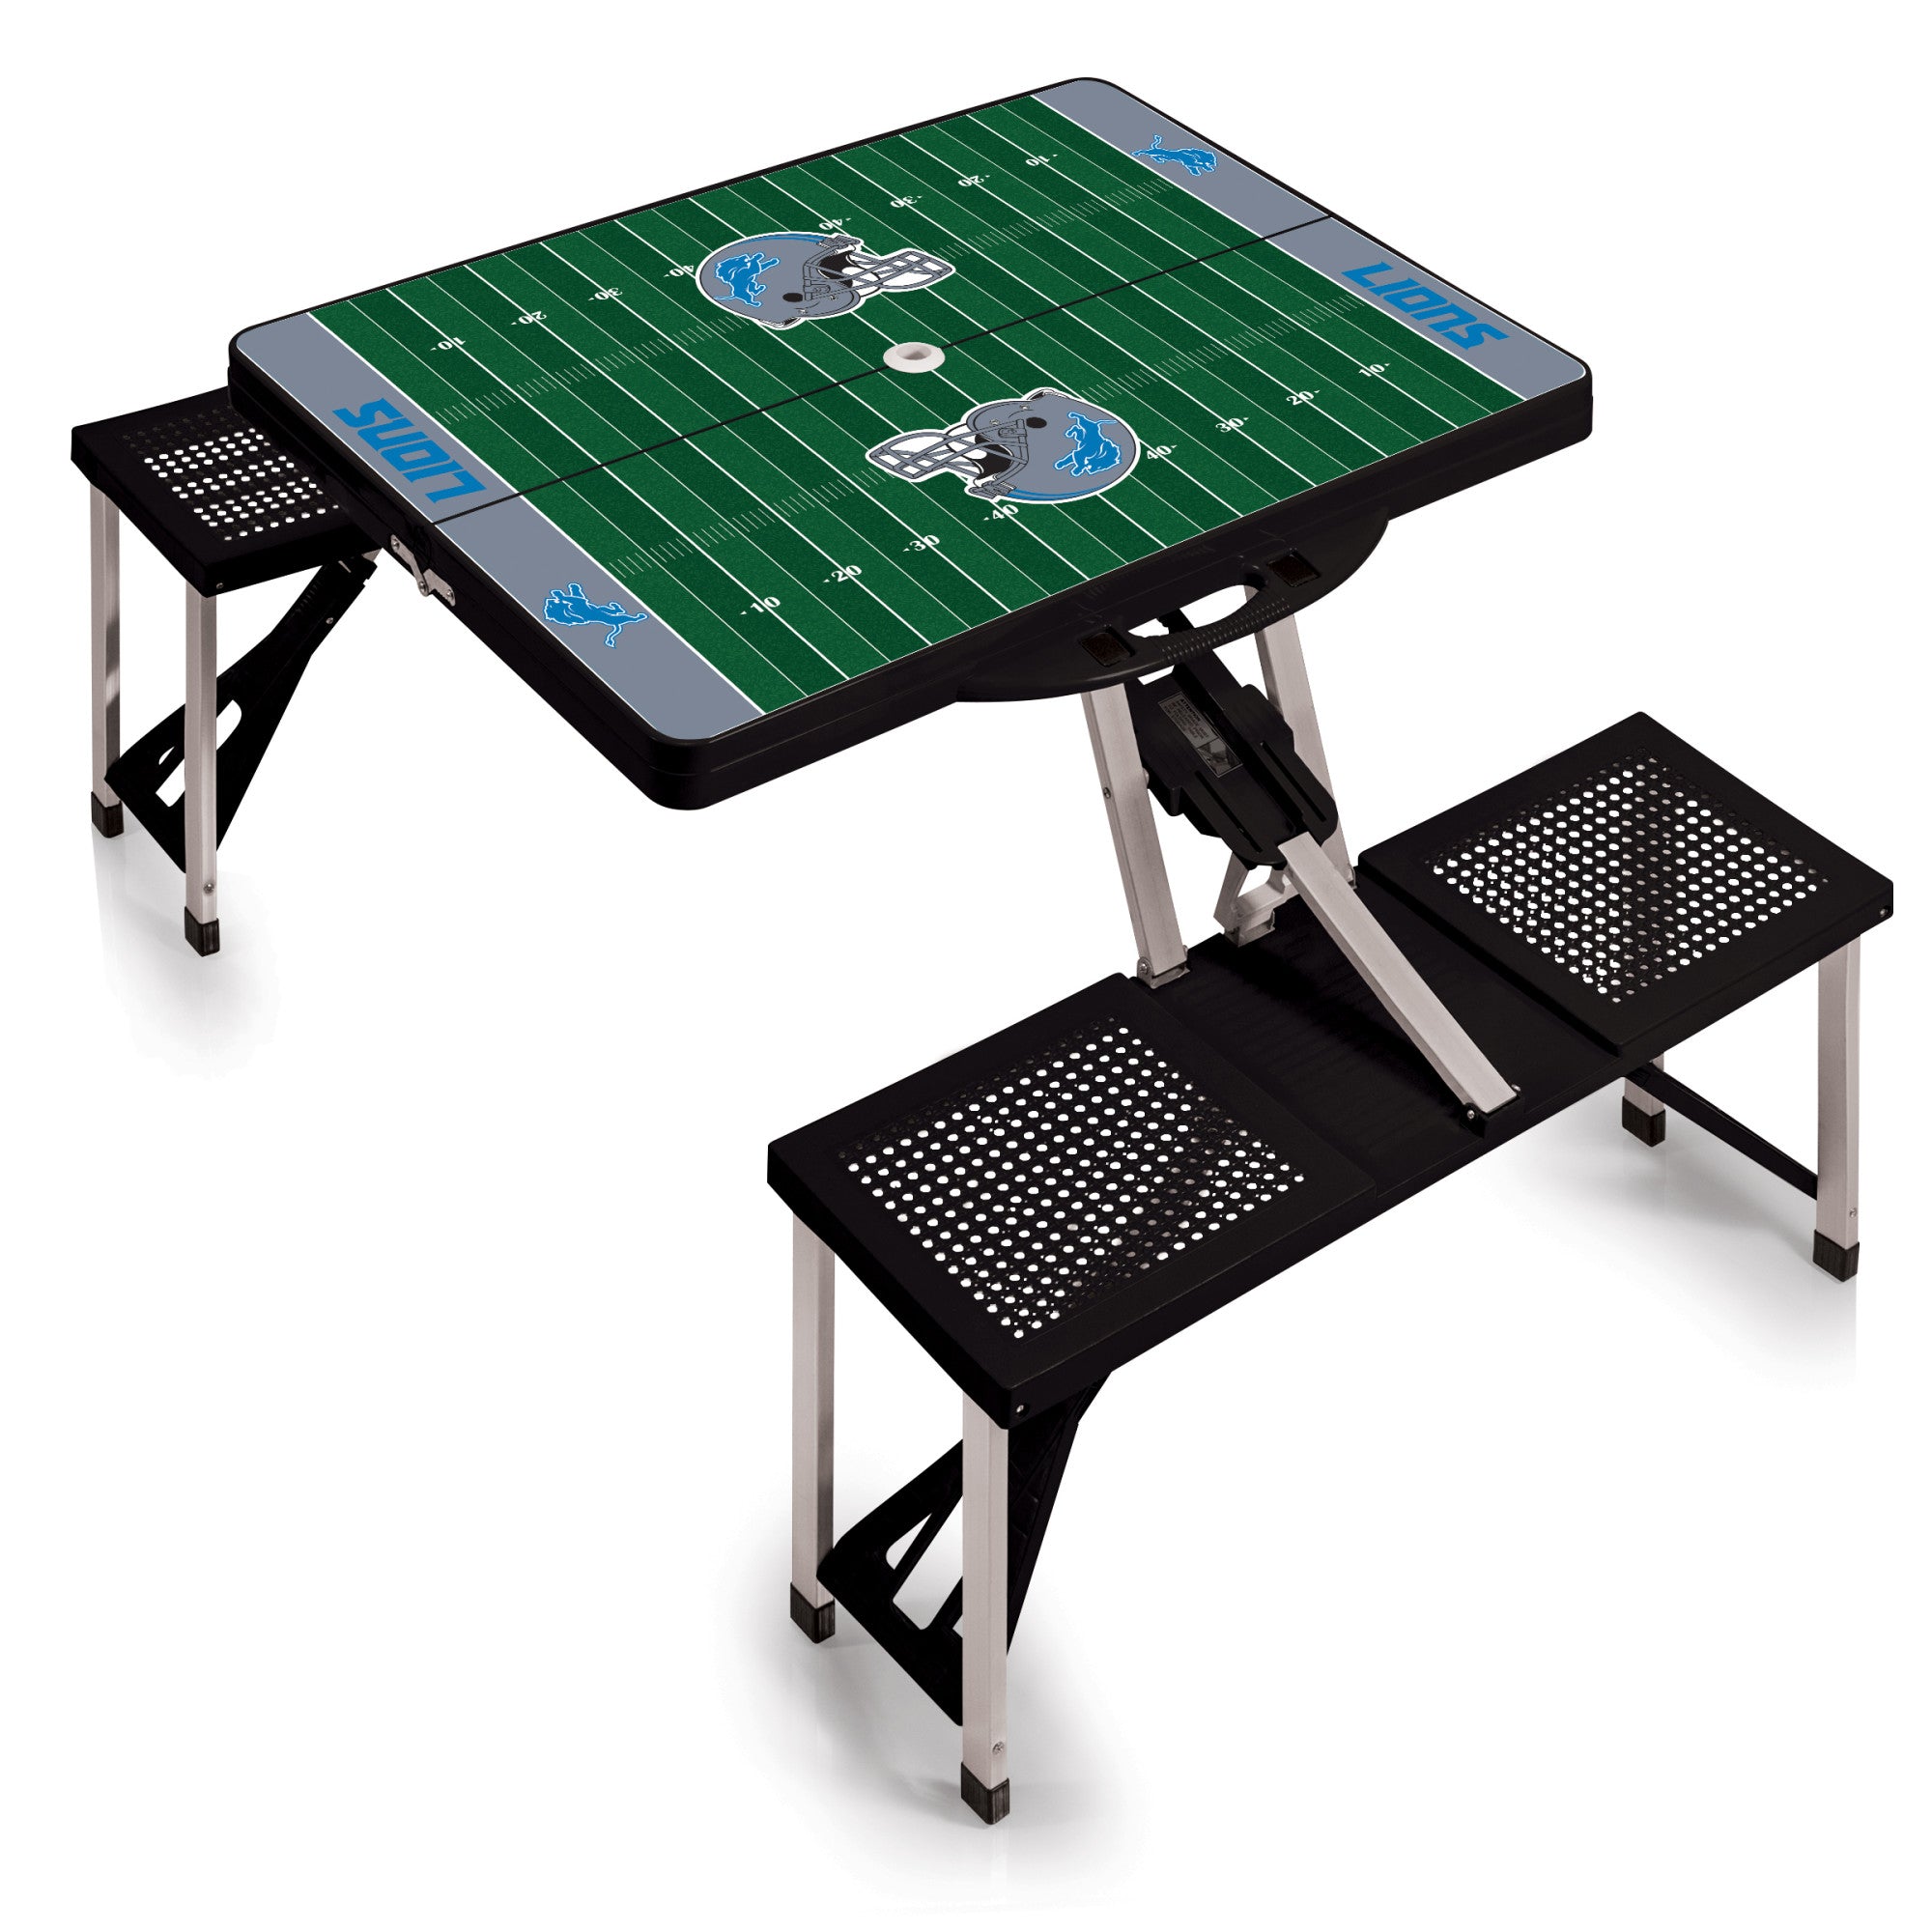 Detroit Lions Football Field - Picnic Table Portable Folding Table with Seats